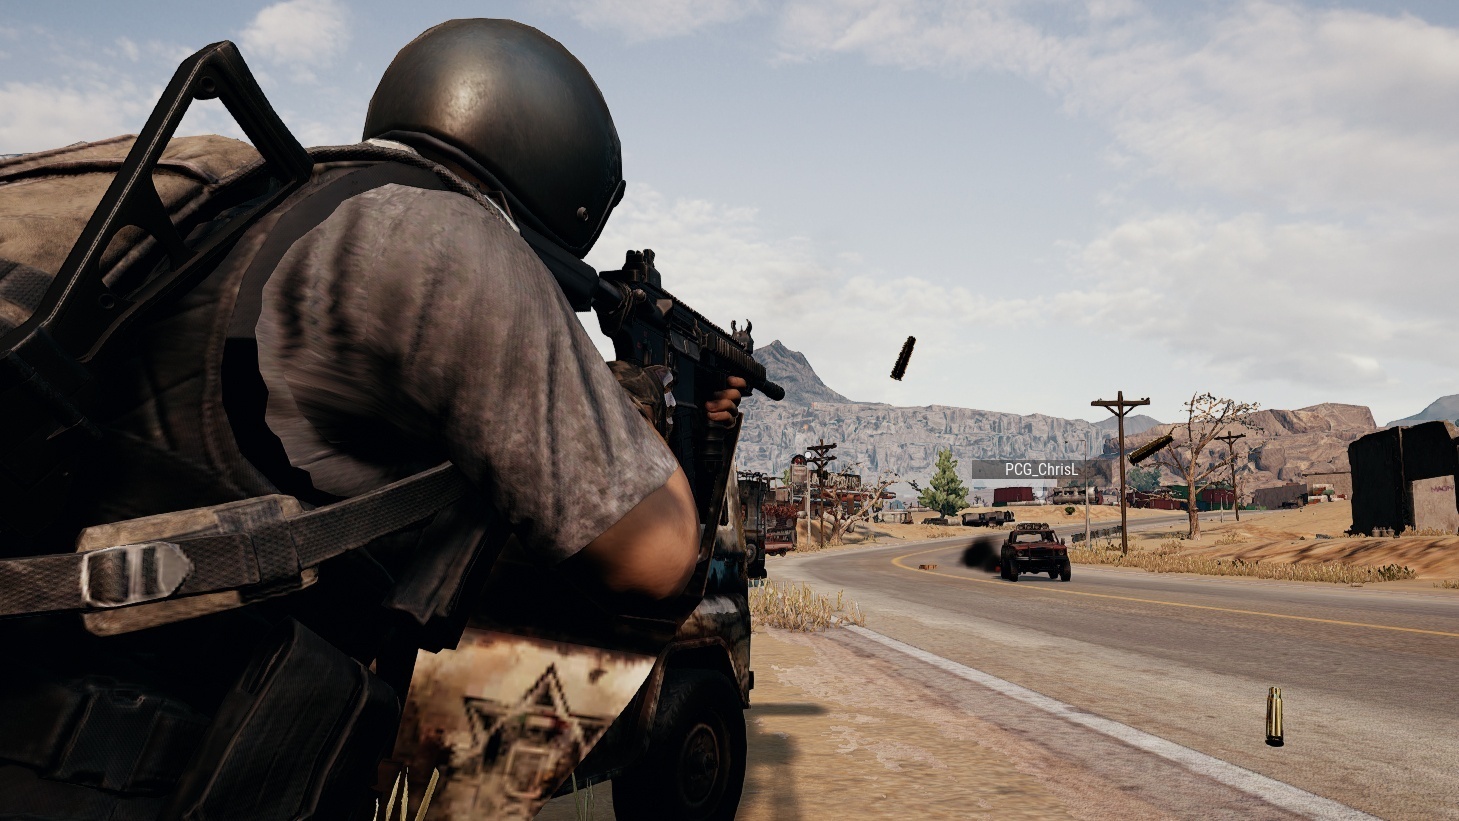 PUBG will add map selection sometime after its launch from Early Access